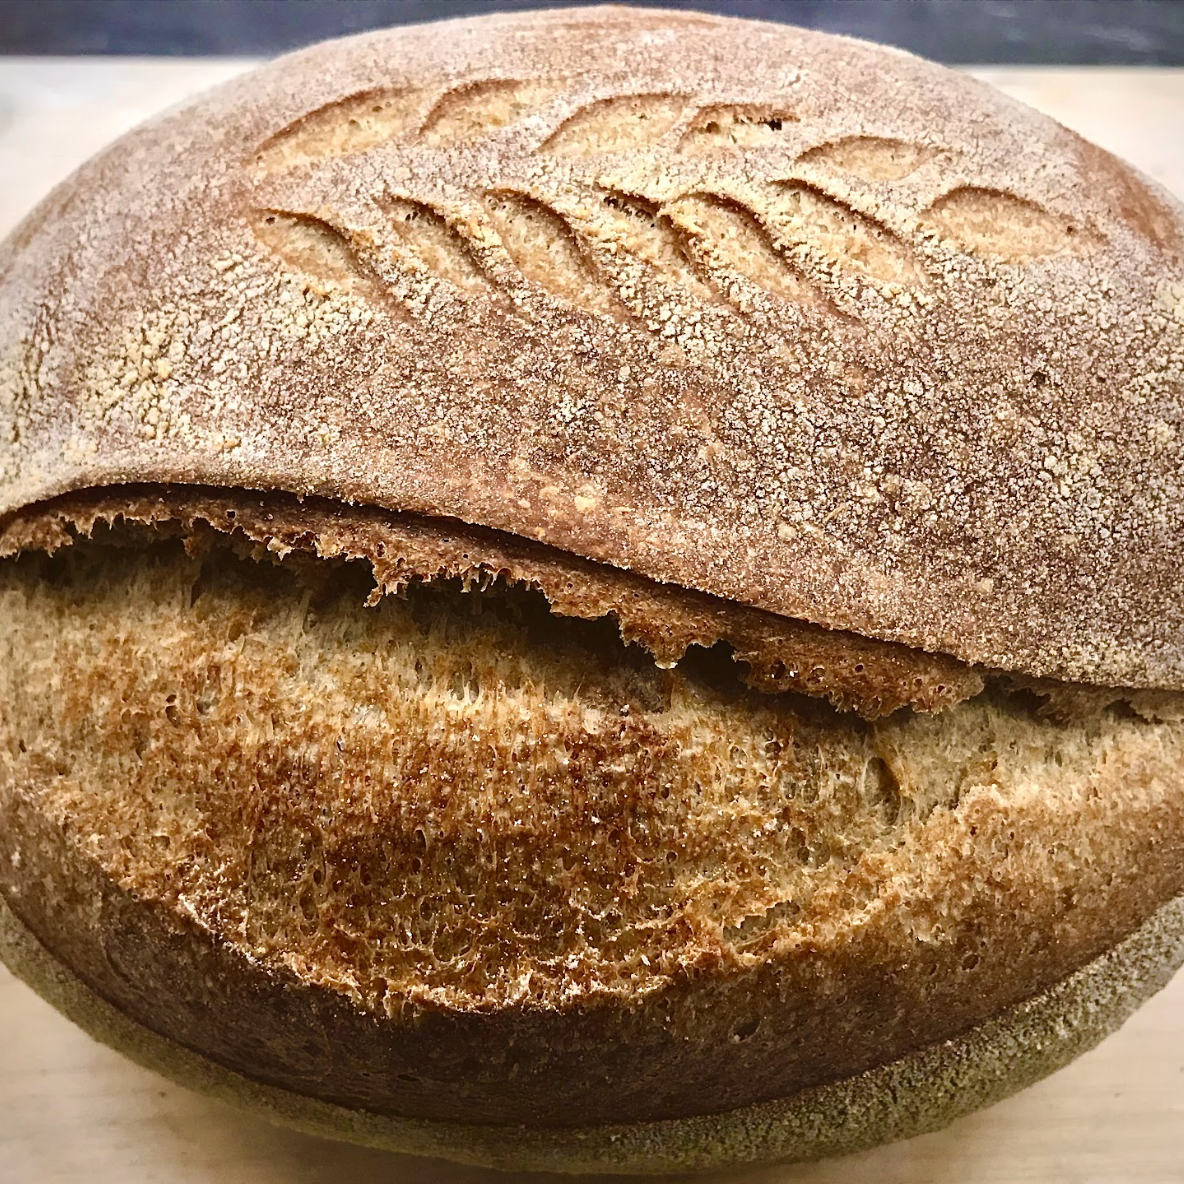 <h4>Bread</h4>
Every day Breads are Whole Wheat Loaf, Anadama Loaf, Multigrain Loaf, Country Sourdough Boule, Pain de Mie Loaf & Baguettes. 
Bread special is Sesame Challah, Plain Challah, Pain Au Gruyere, Bleu Cheese & Walnut, Potato Gruyere Sage & Leek Focaccia 